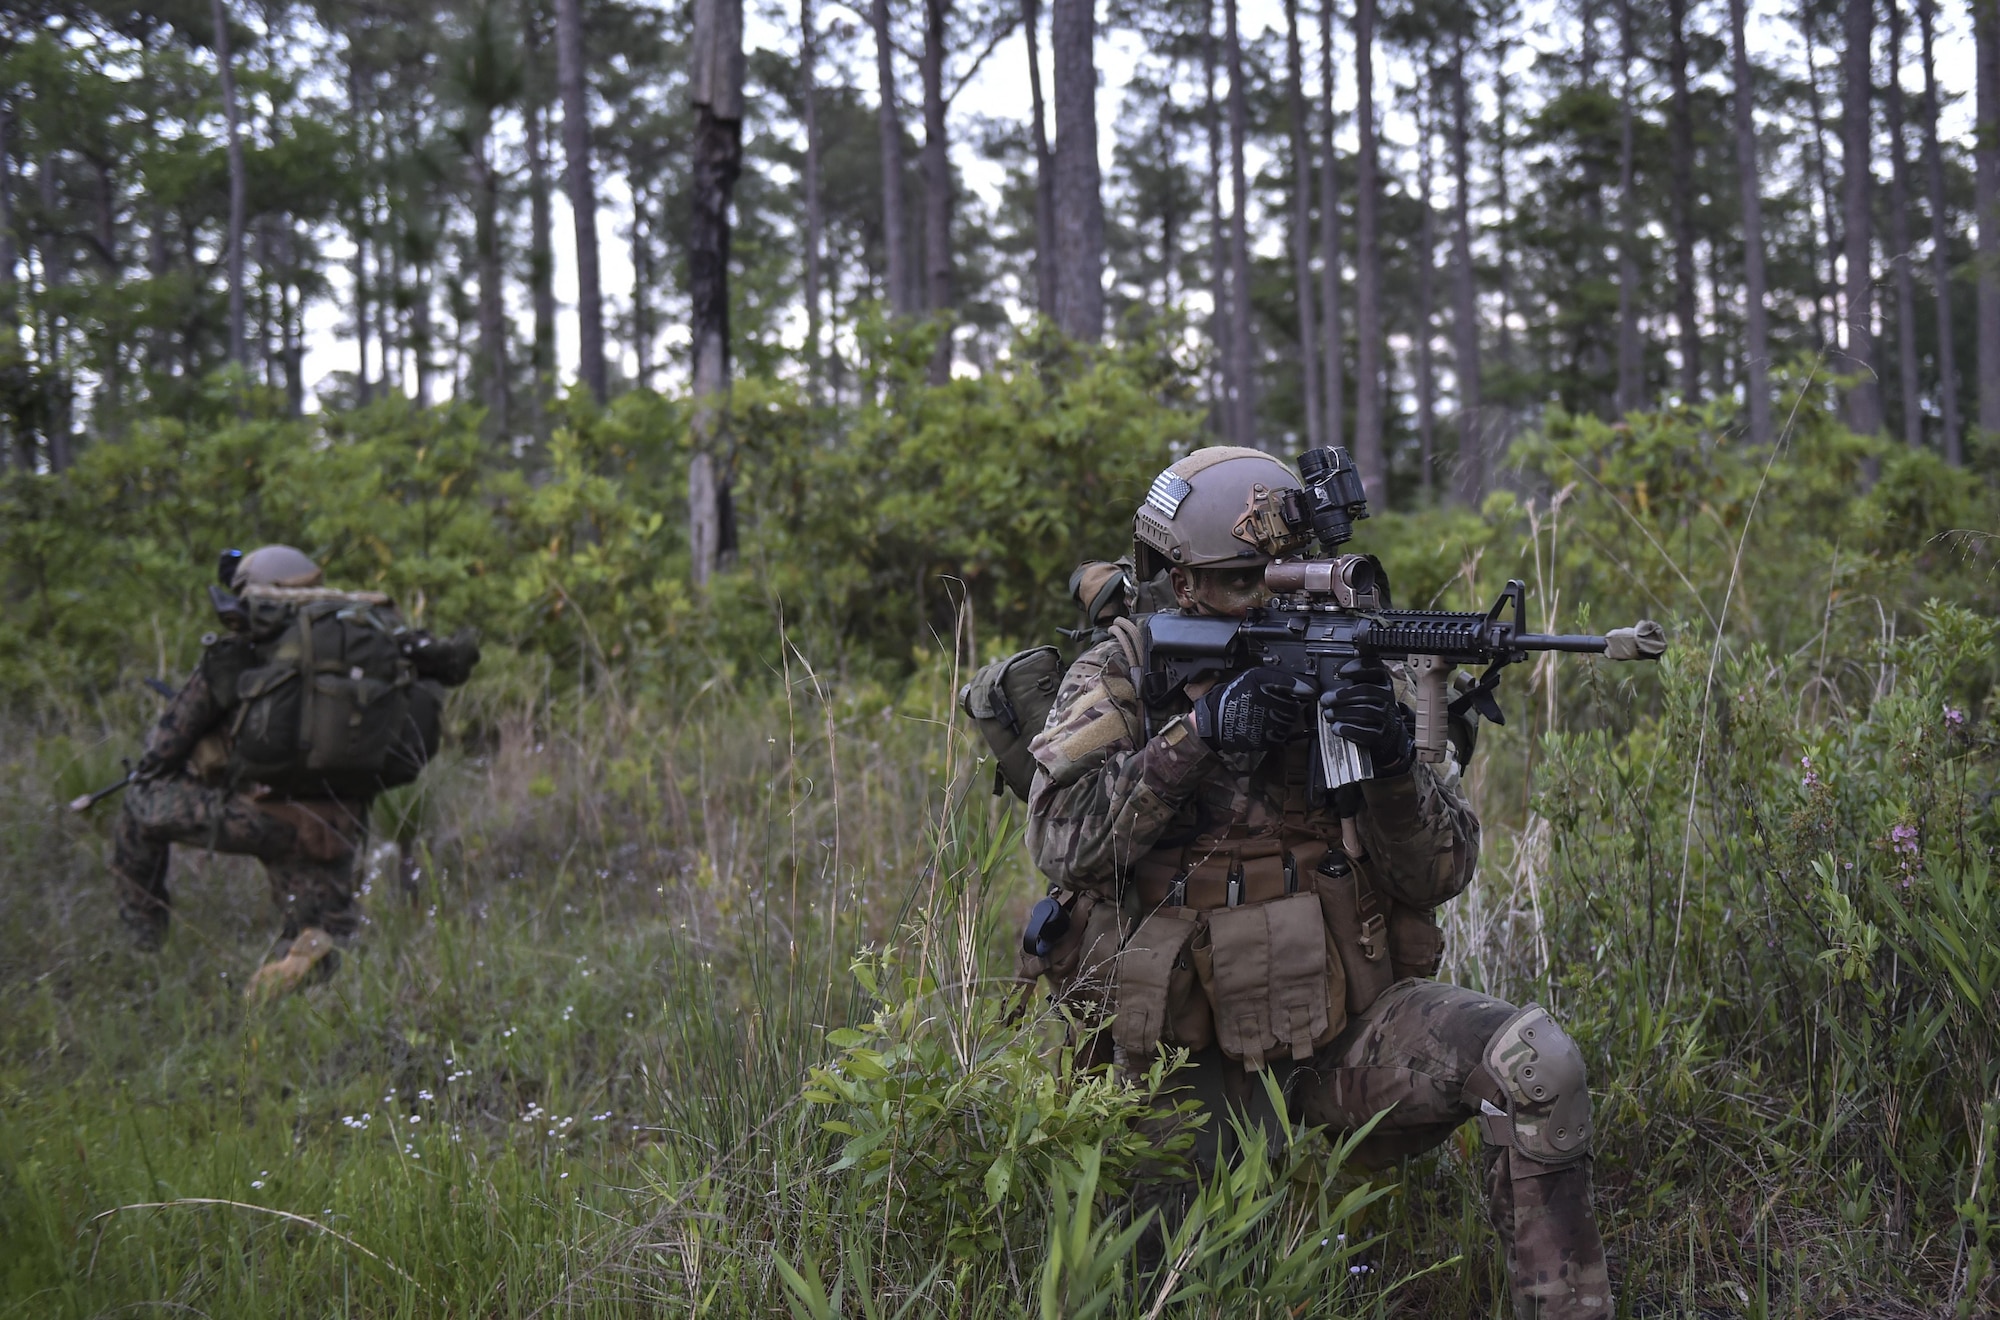 A U.S. Air Force Special Tactics officer with the 24th Special Operations Wing provides rear security during a troop movement at Field Training Exercise Raider Spirit, May 1, 2017, at Camp Lejeune, N.C. For the first time, Special Tactics Airmen spent three months in Marine Special Operations Command’s Marine Raider training pipeline, representing efforts to build joint mindsets across special operations forces.  (U.S. Air Force photo by Senior Airman Ryan Conroy)